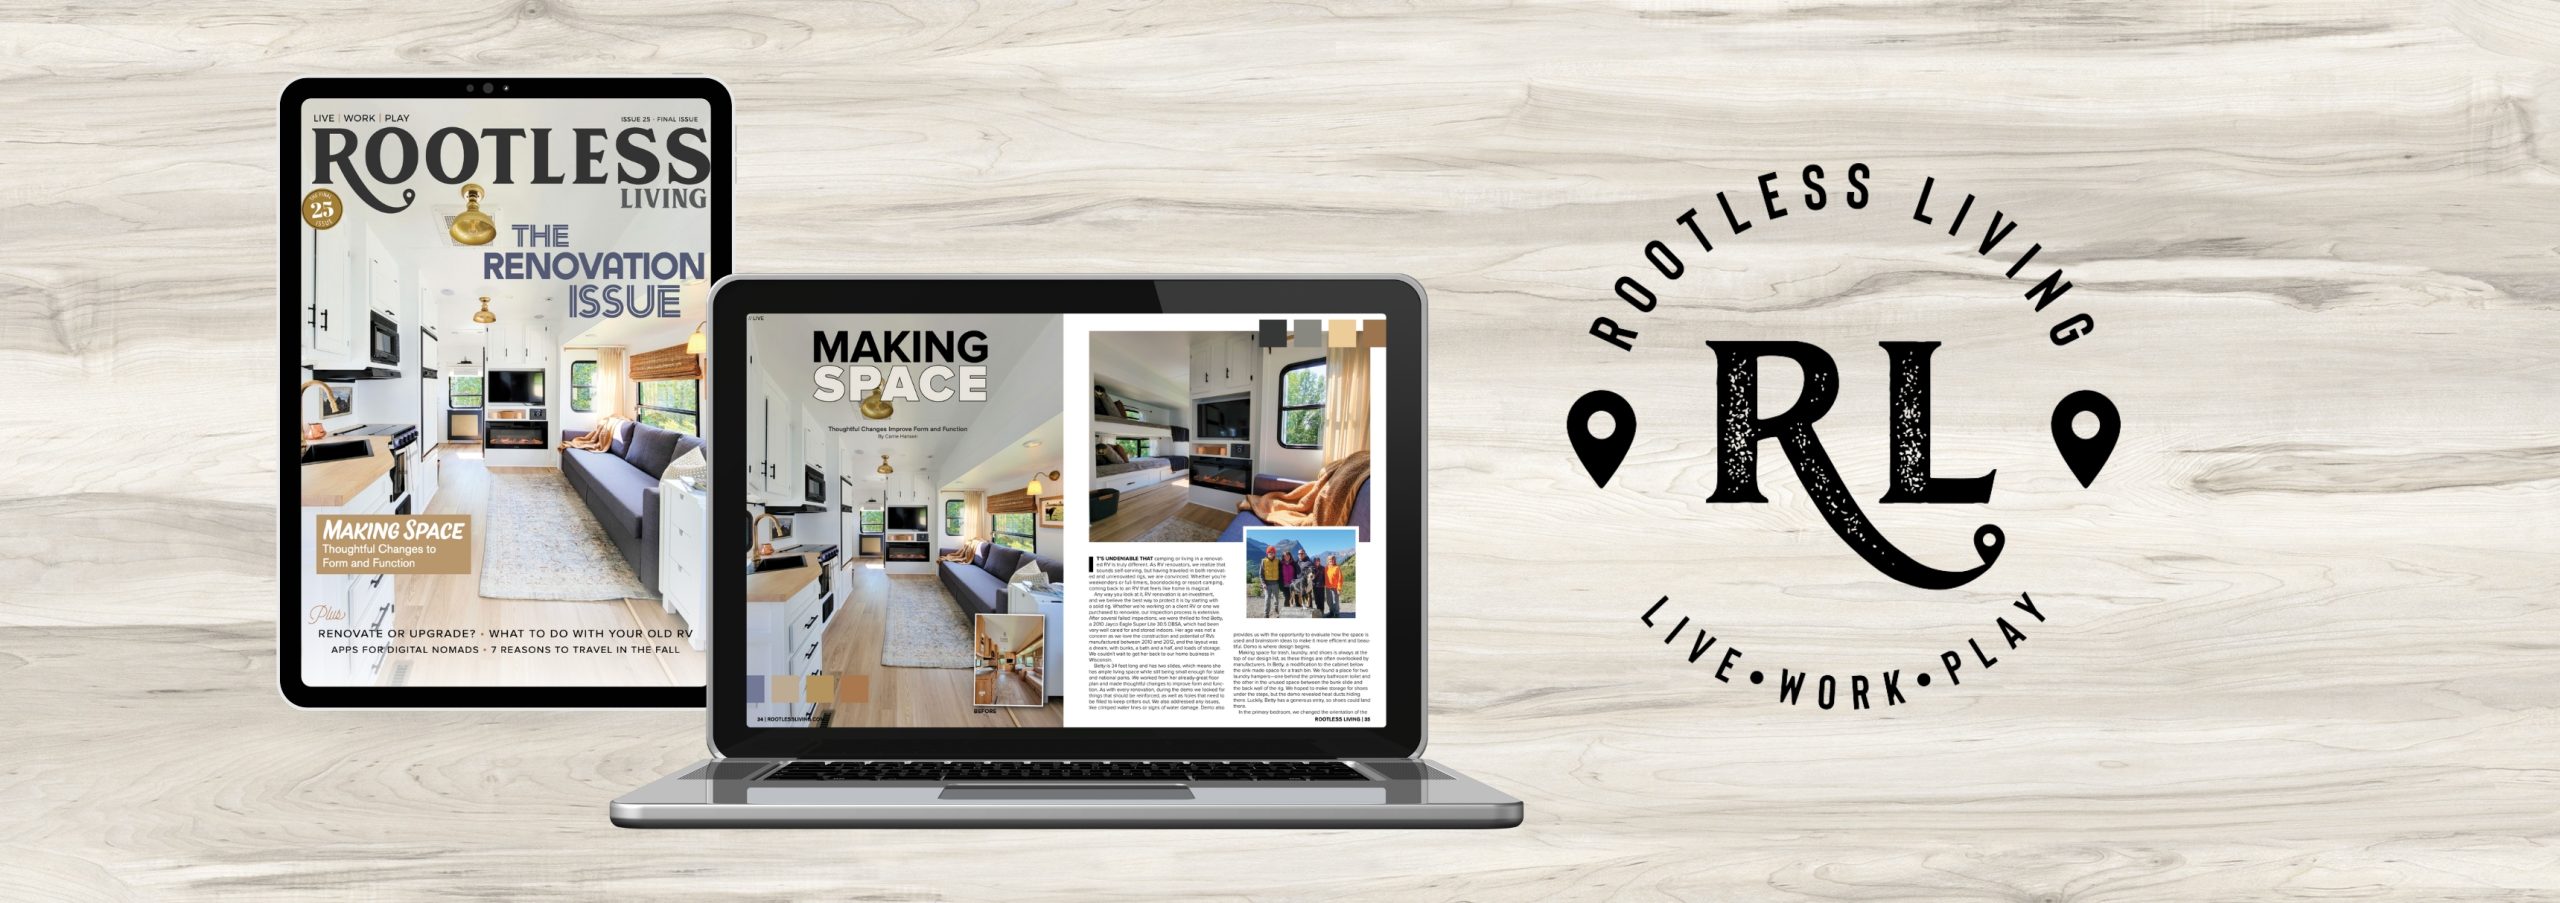 Rootless Living magazine issue 25 the final issue on tablet and laptop | Rootless Living Magazine